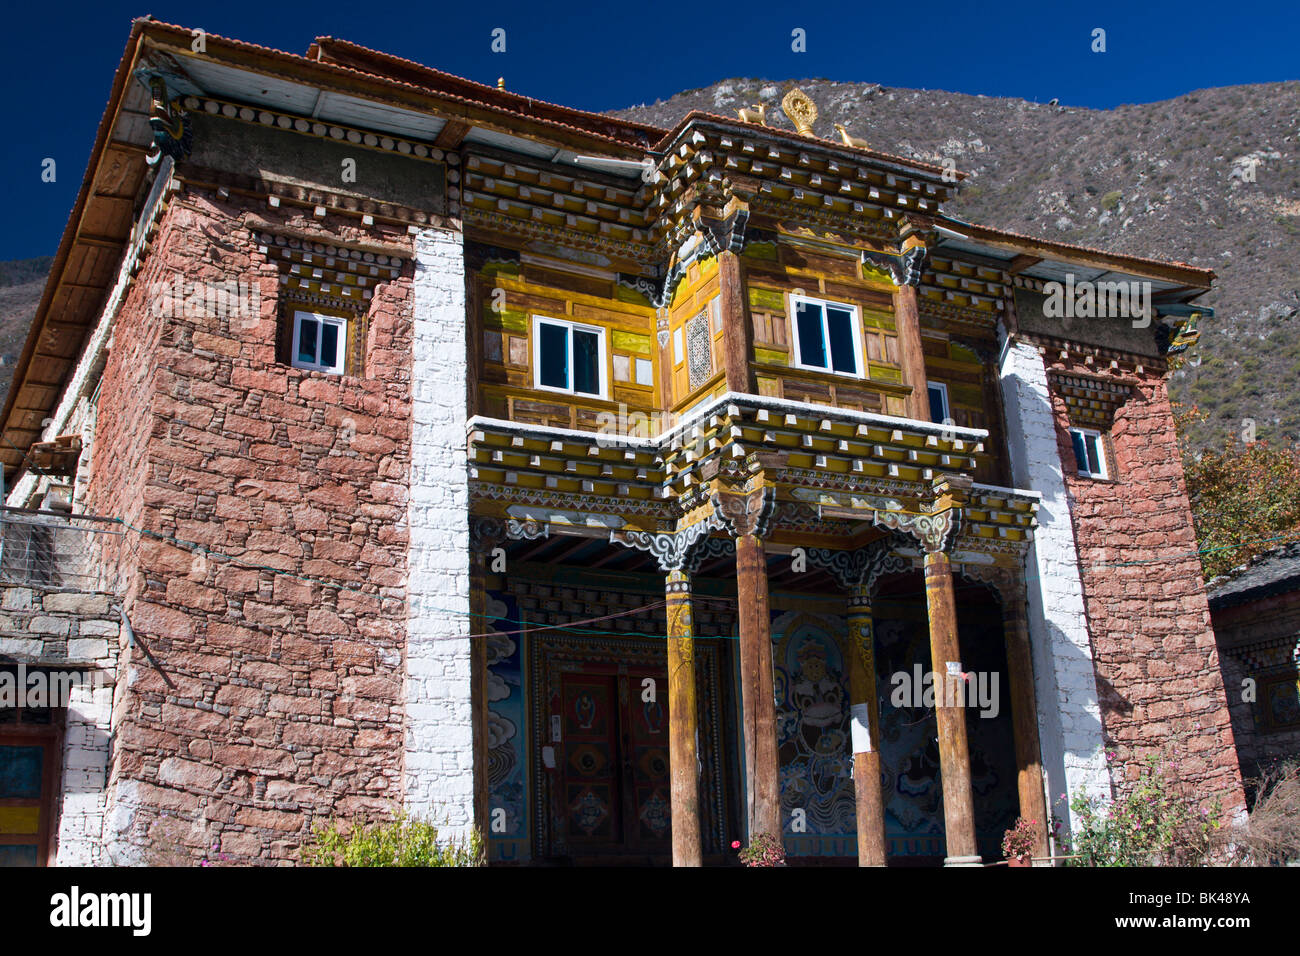 A Buddhist temple in a village in the Tibetan plateau. Stock Photo